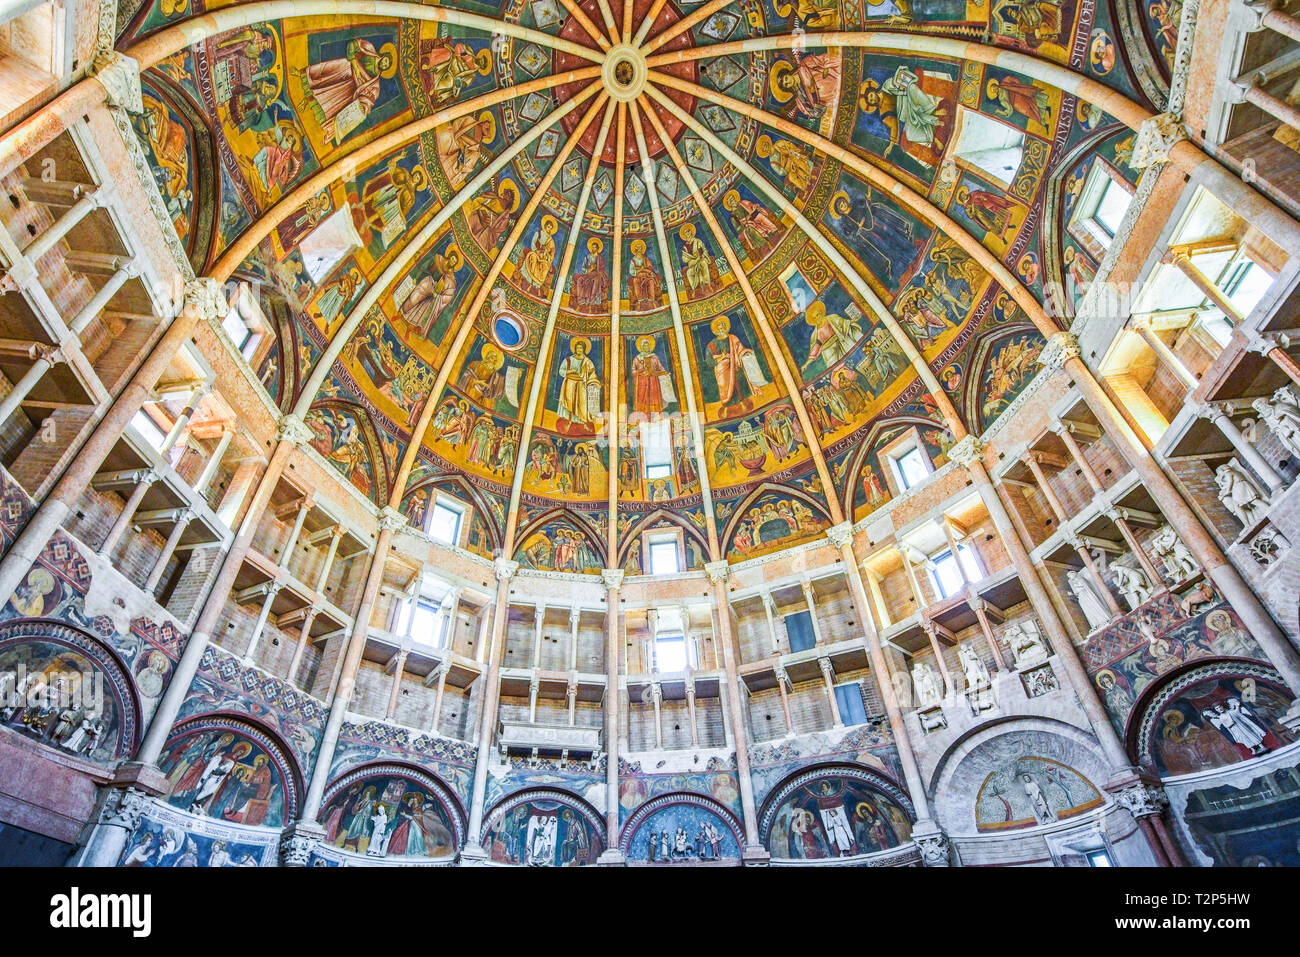 Inside the famous Baptistery of Parma richly decorated by frescoes and sculpturs, Parma, Emilia Romagna, Italy. Stock Photo